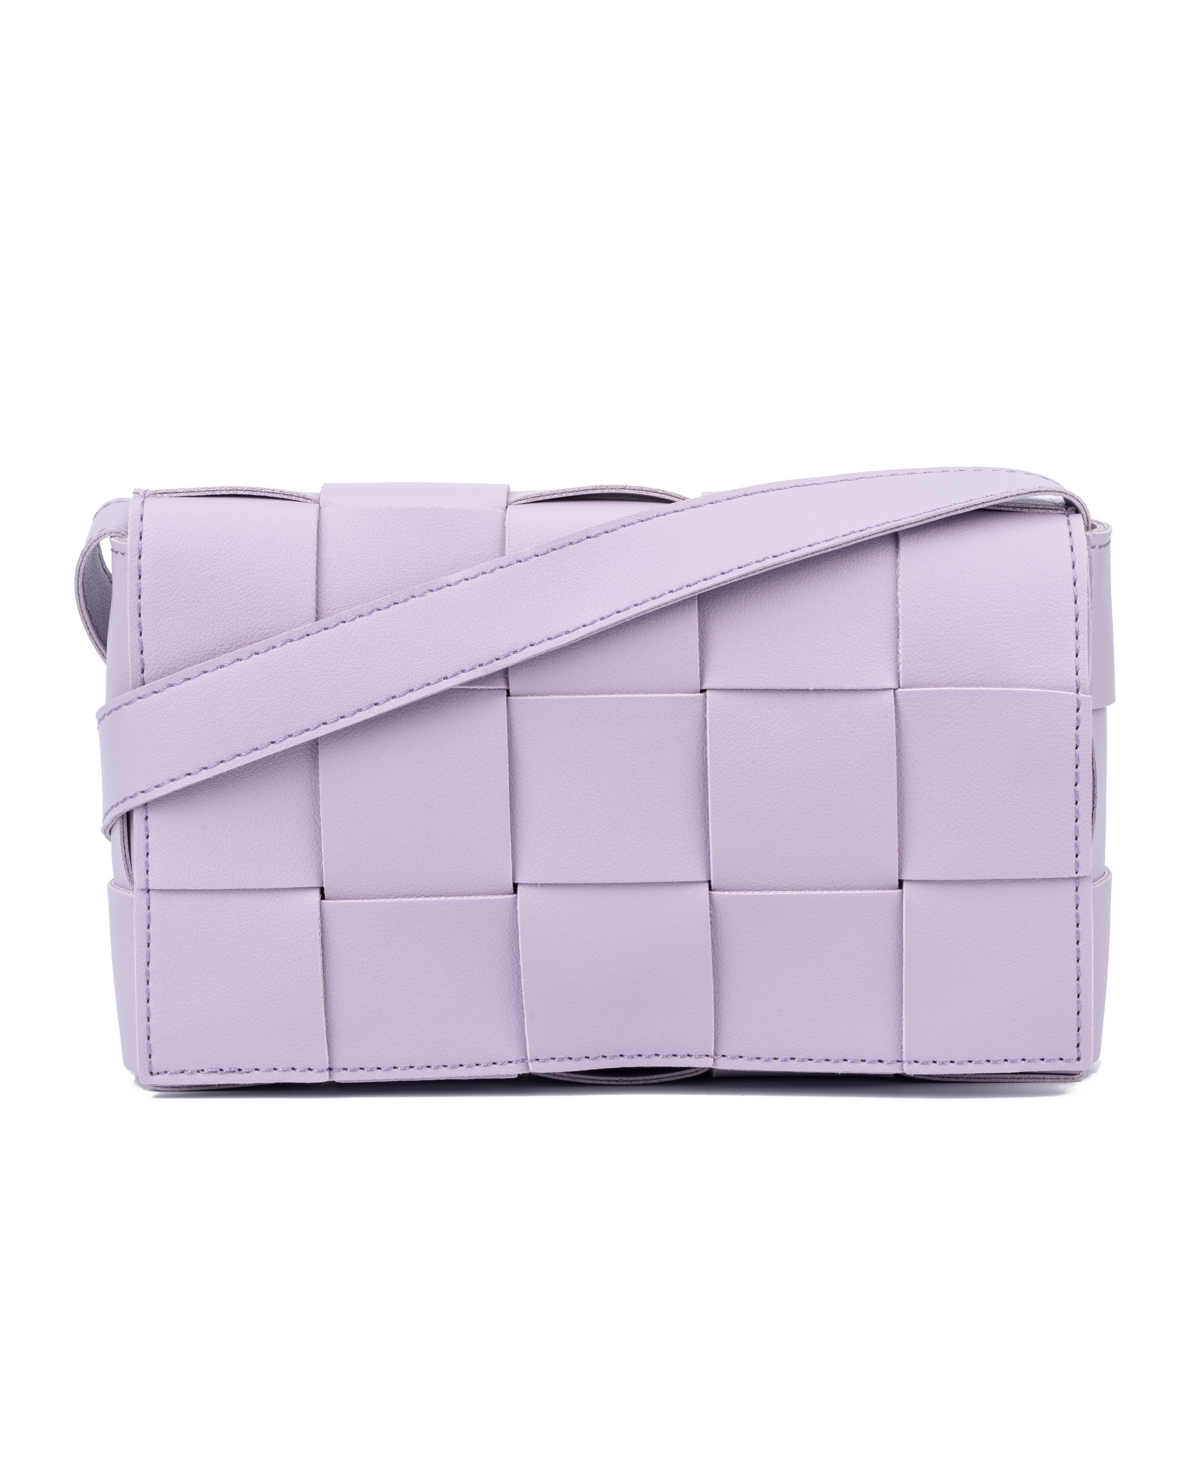 Olivia Miller Women's Ainsly Small Crossbody In Lavender